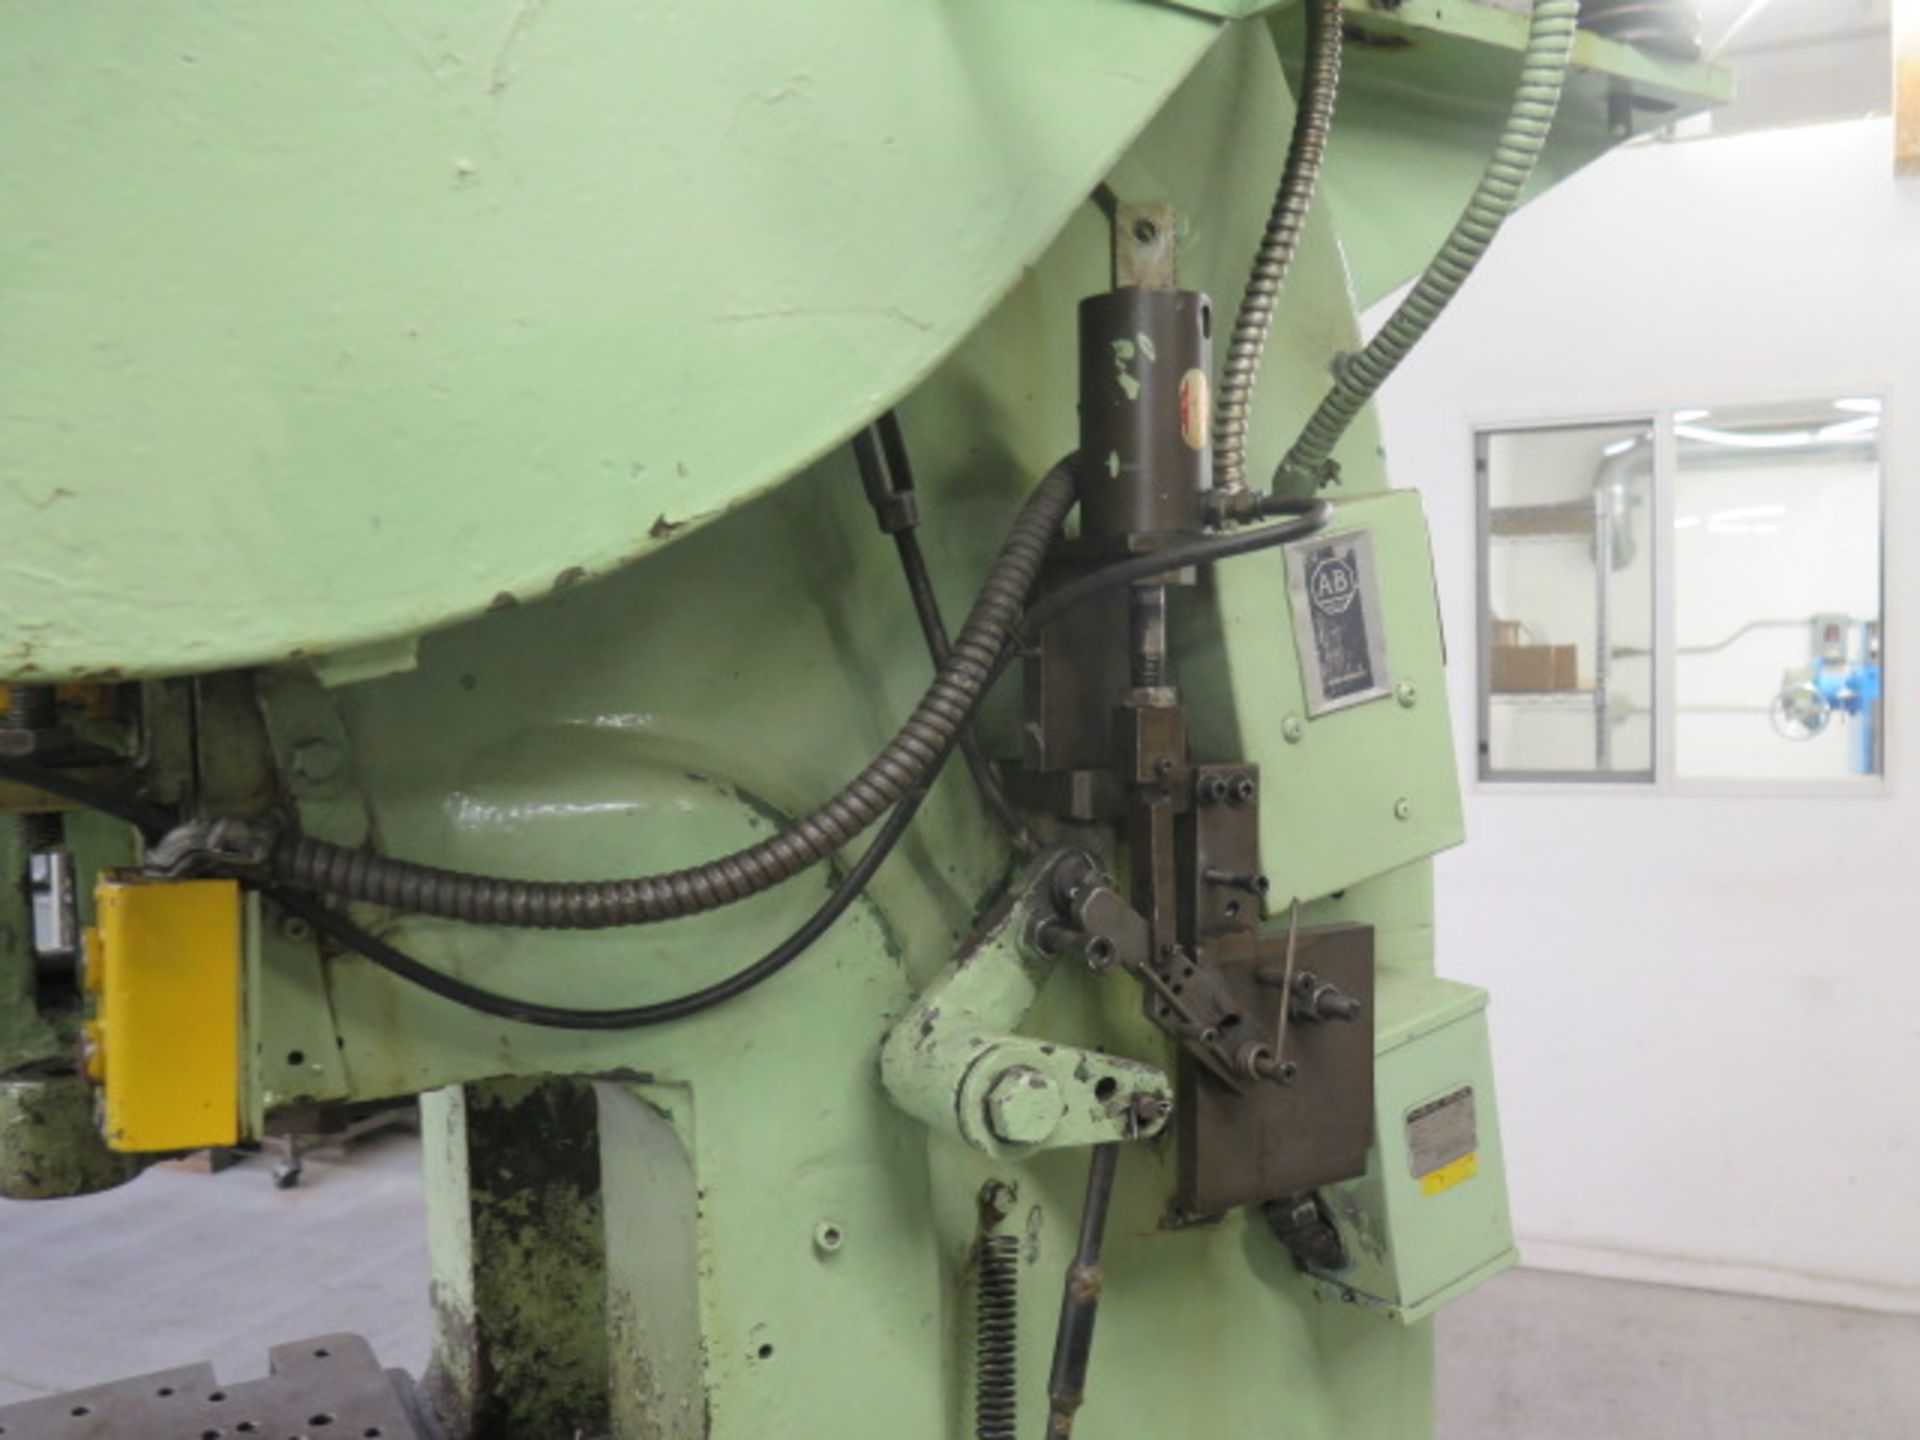 Minster No. 6 56 Ton OBI Stamping Press, SOLD AS IS - PARTS ONLY, SOLD AS SCRAP. - Image 9 of 11